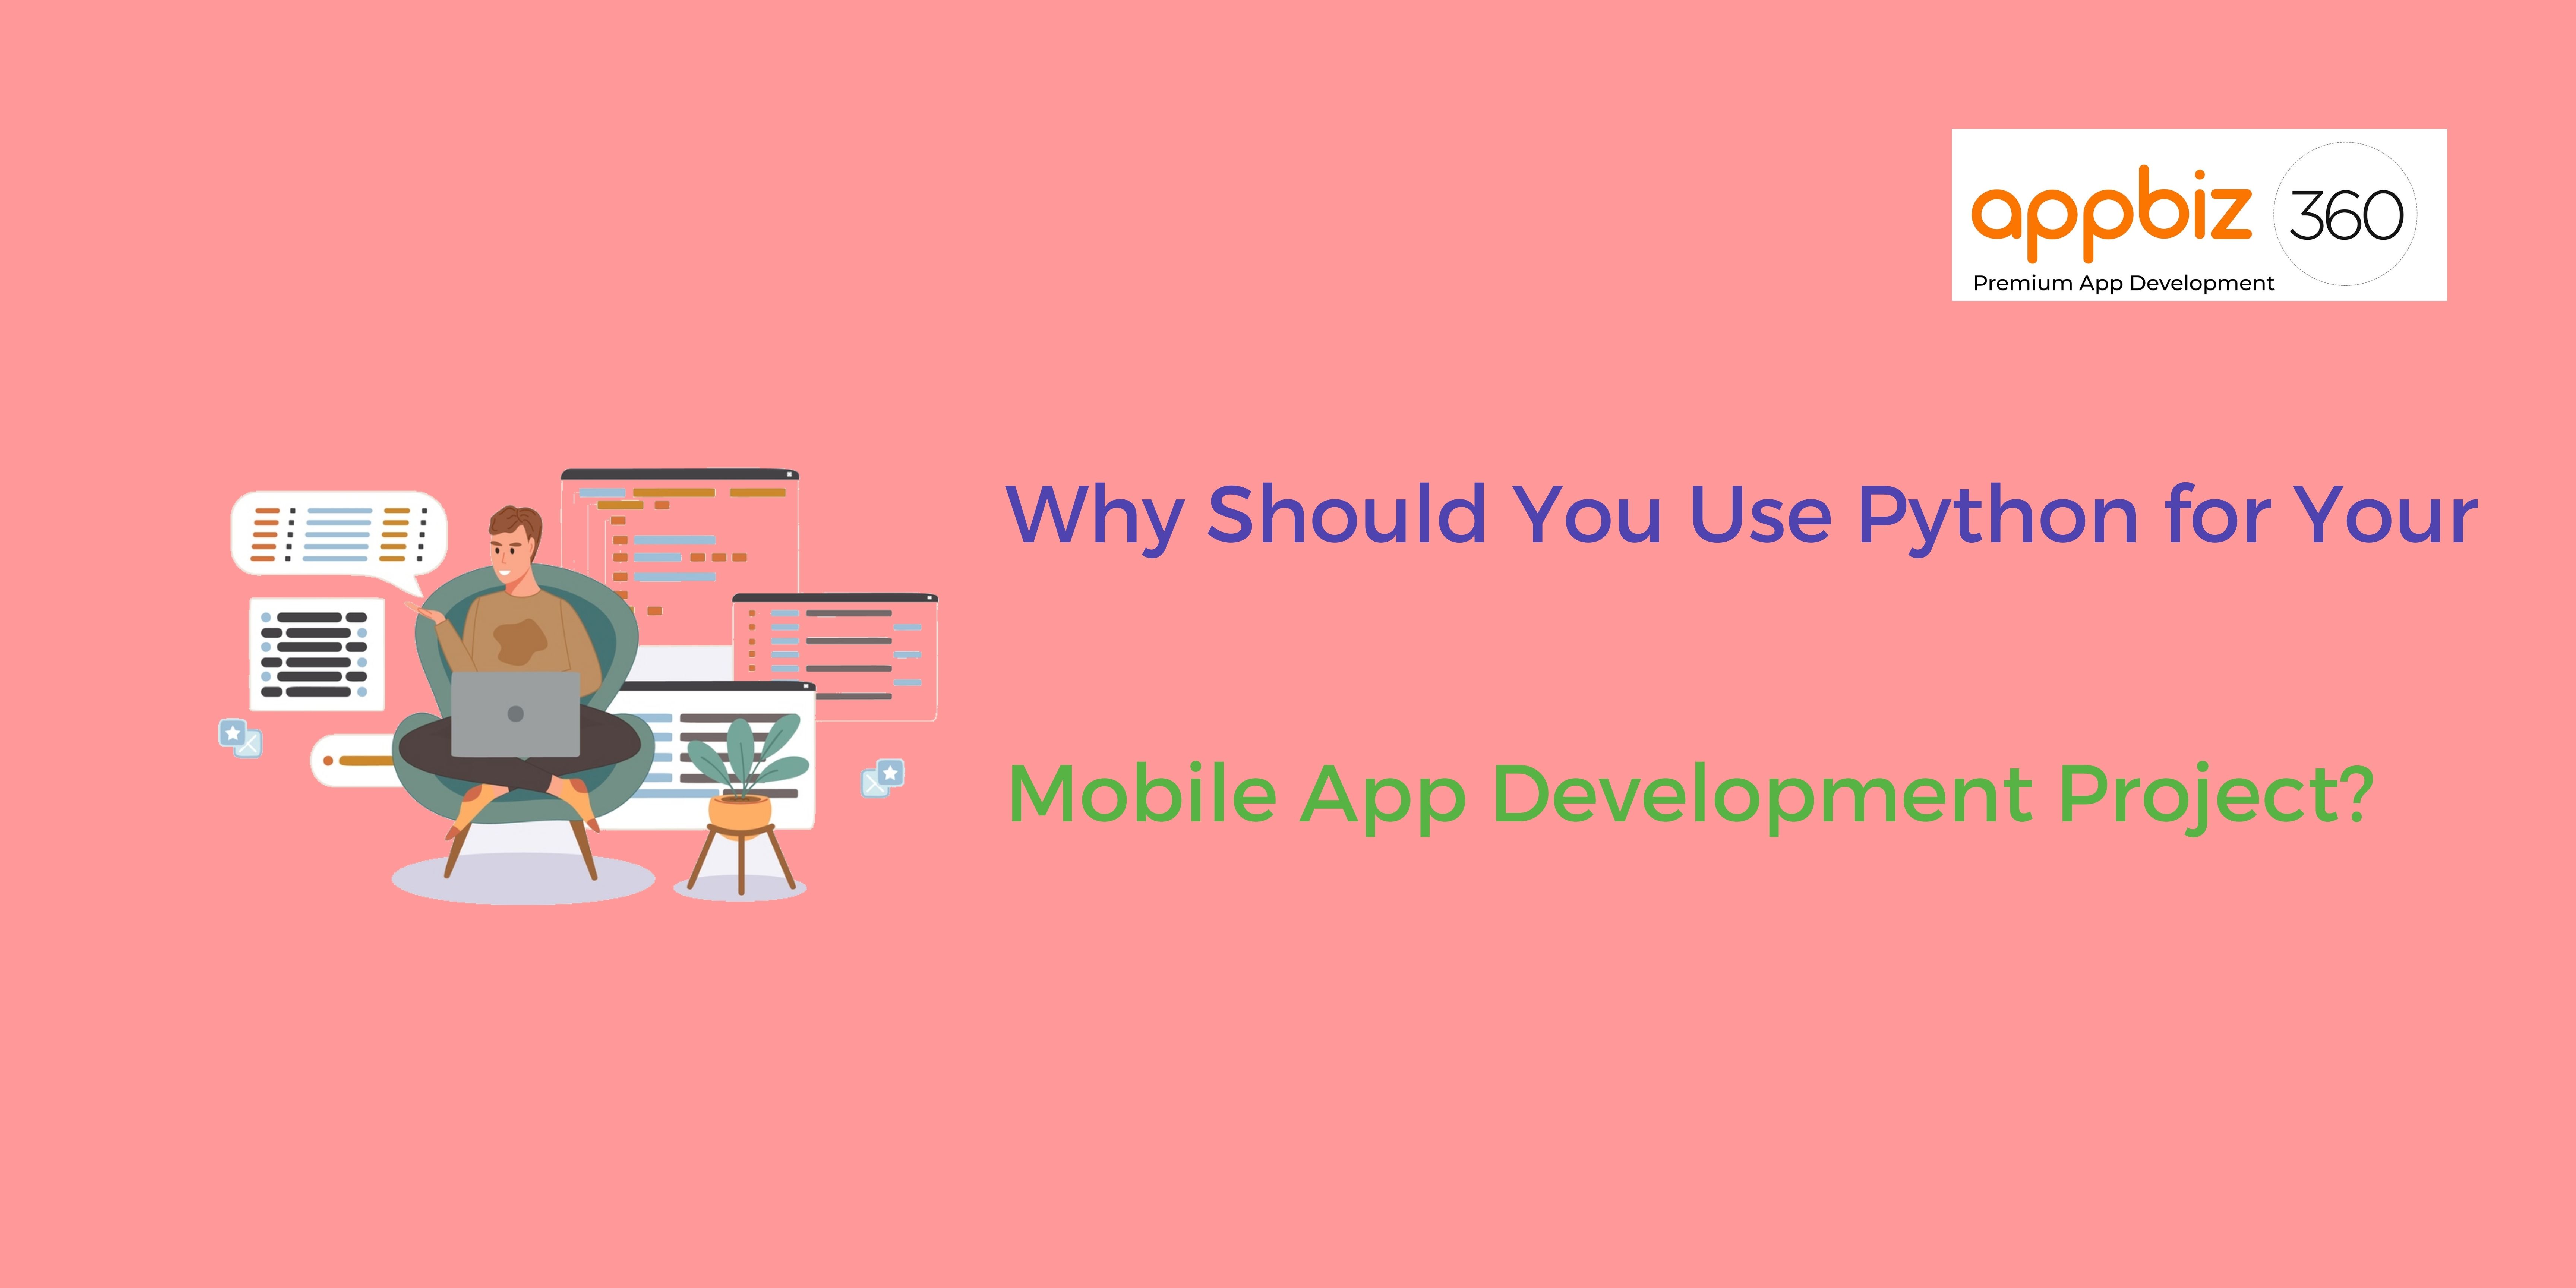 Why Should You Use Python for Your Mobile App Development Project?